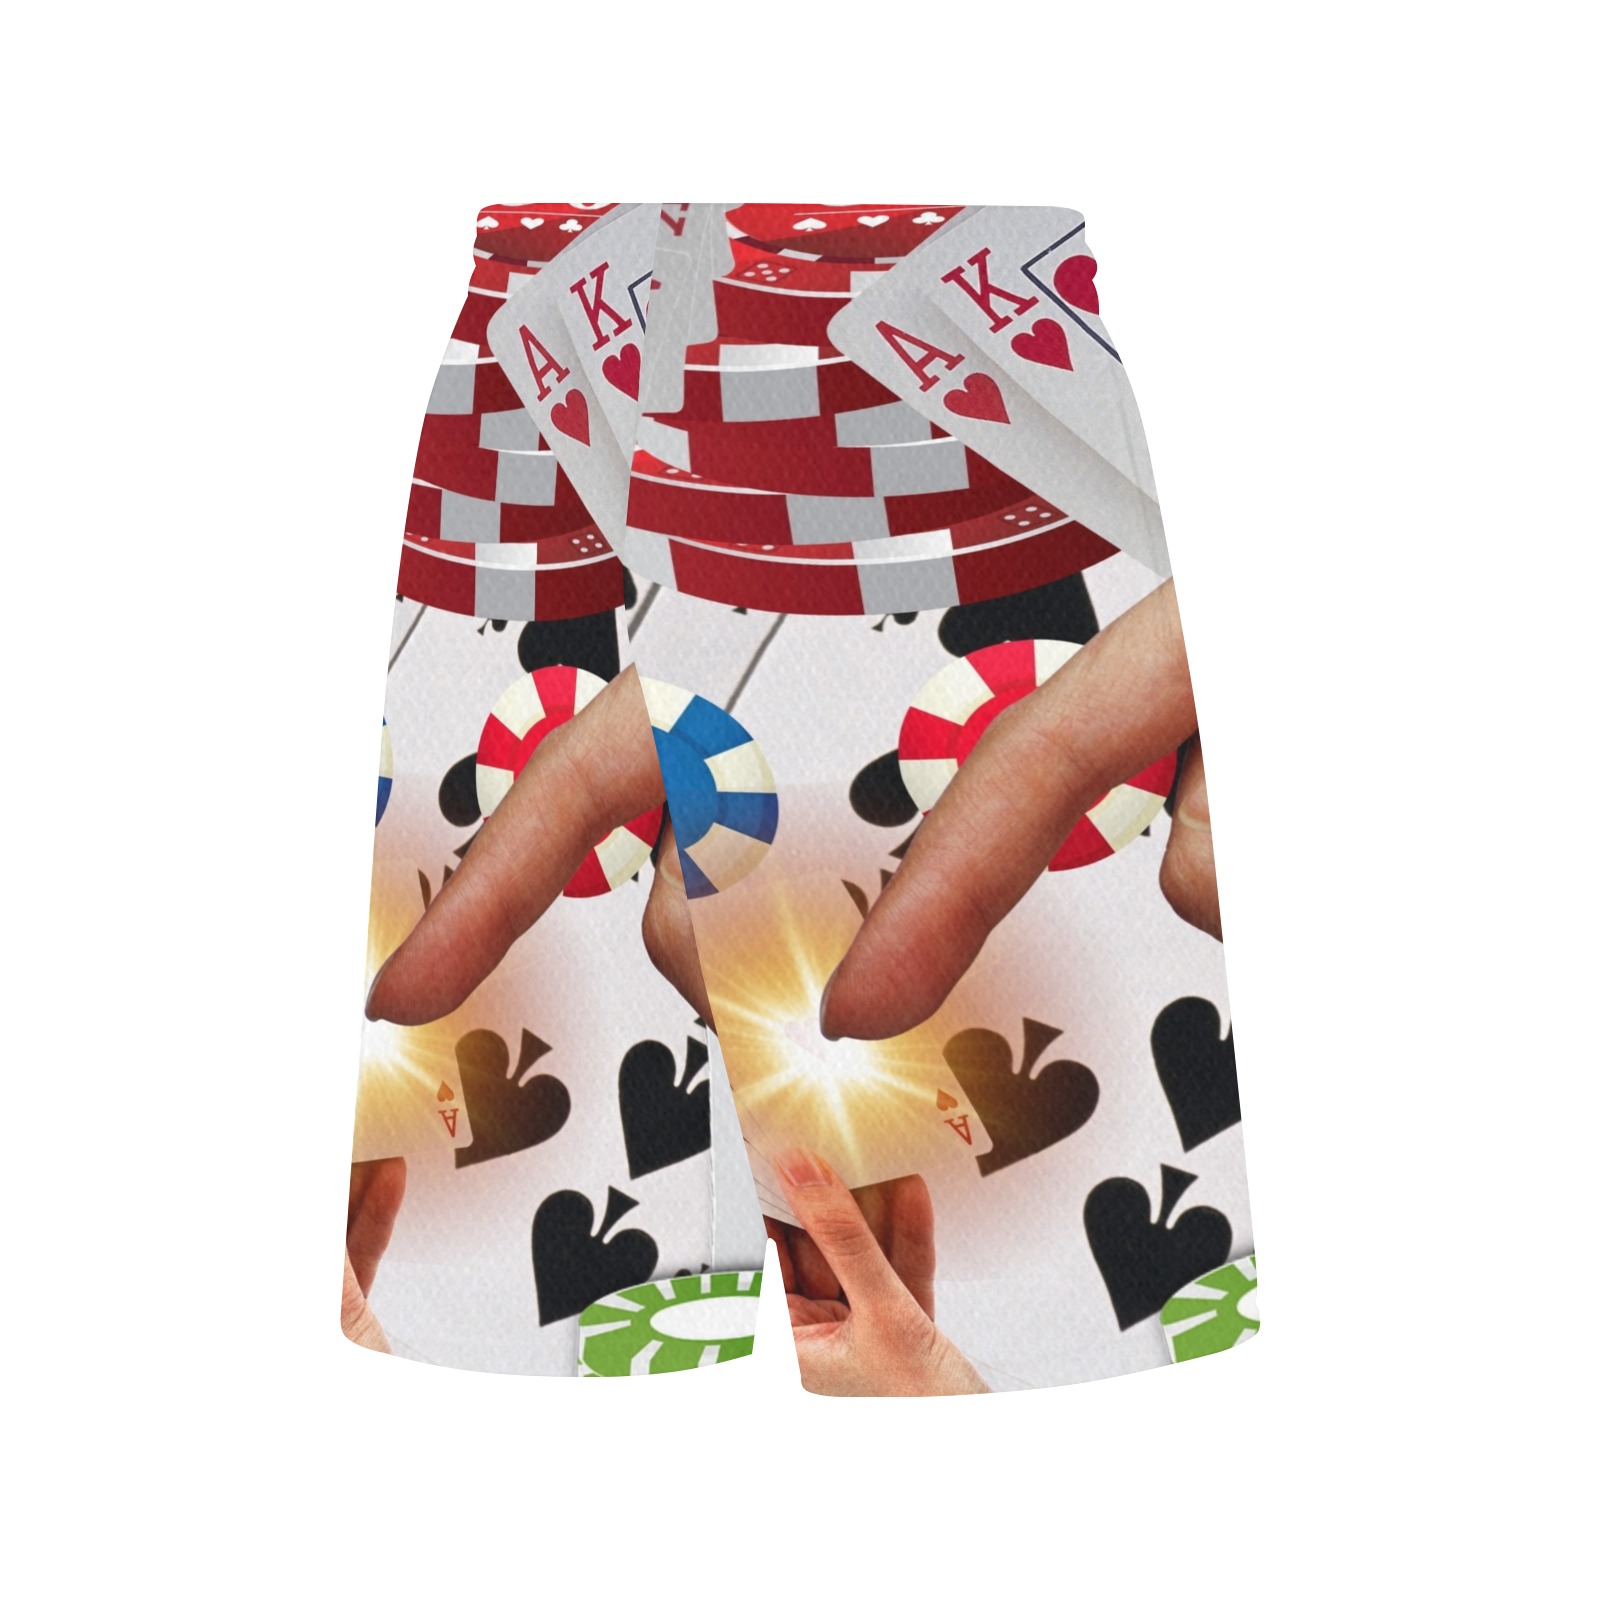 POKER NIGHT TOO All Over Print Basketball Shorts with Pocket